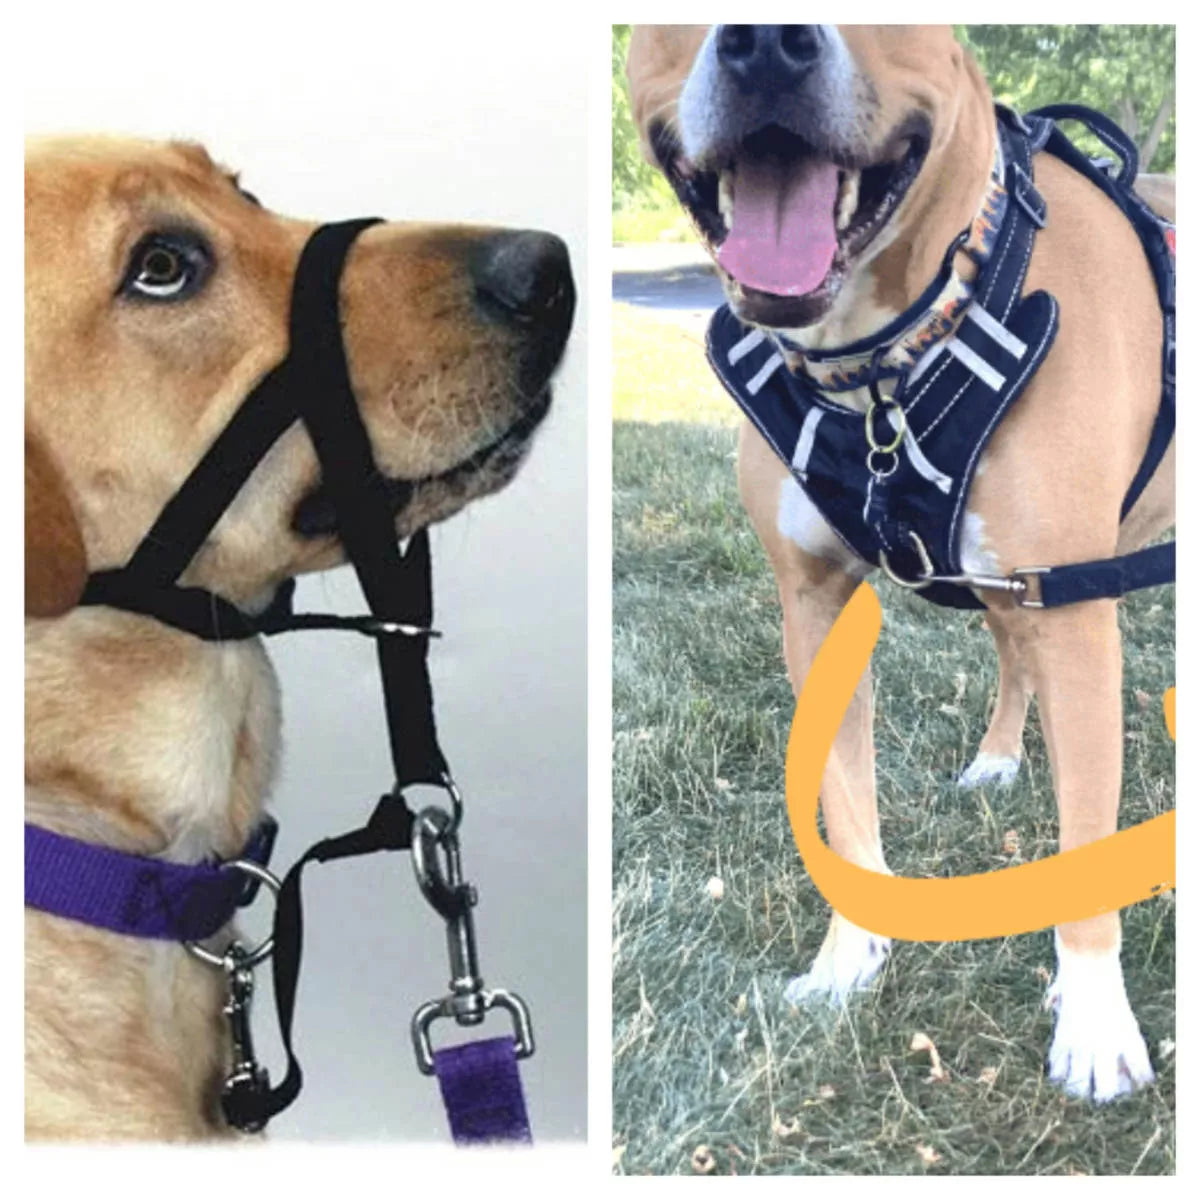 Head Halter or Front Clip Harness - which one is best? – wiggles